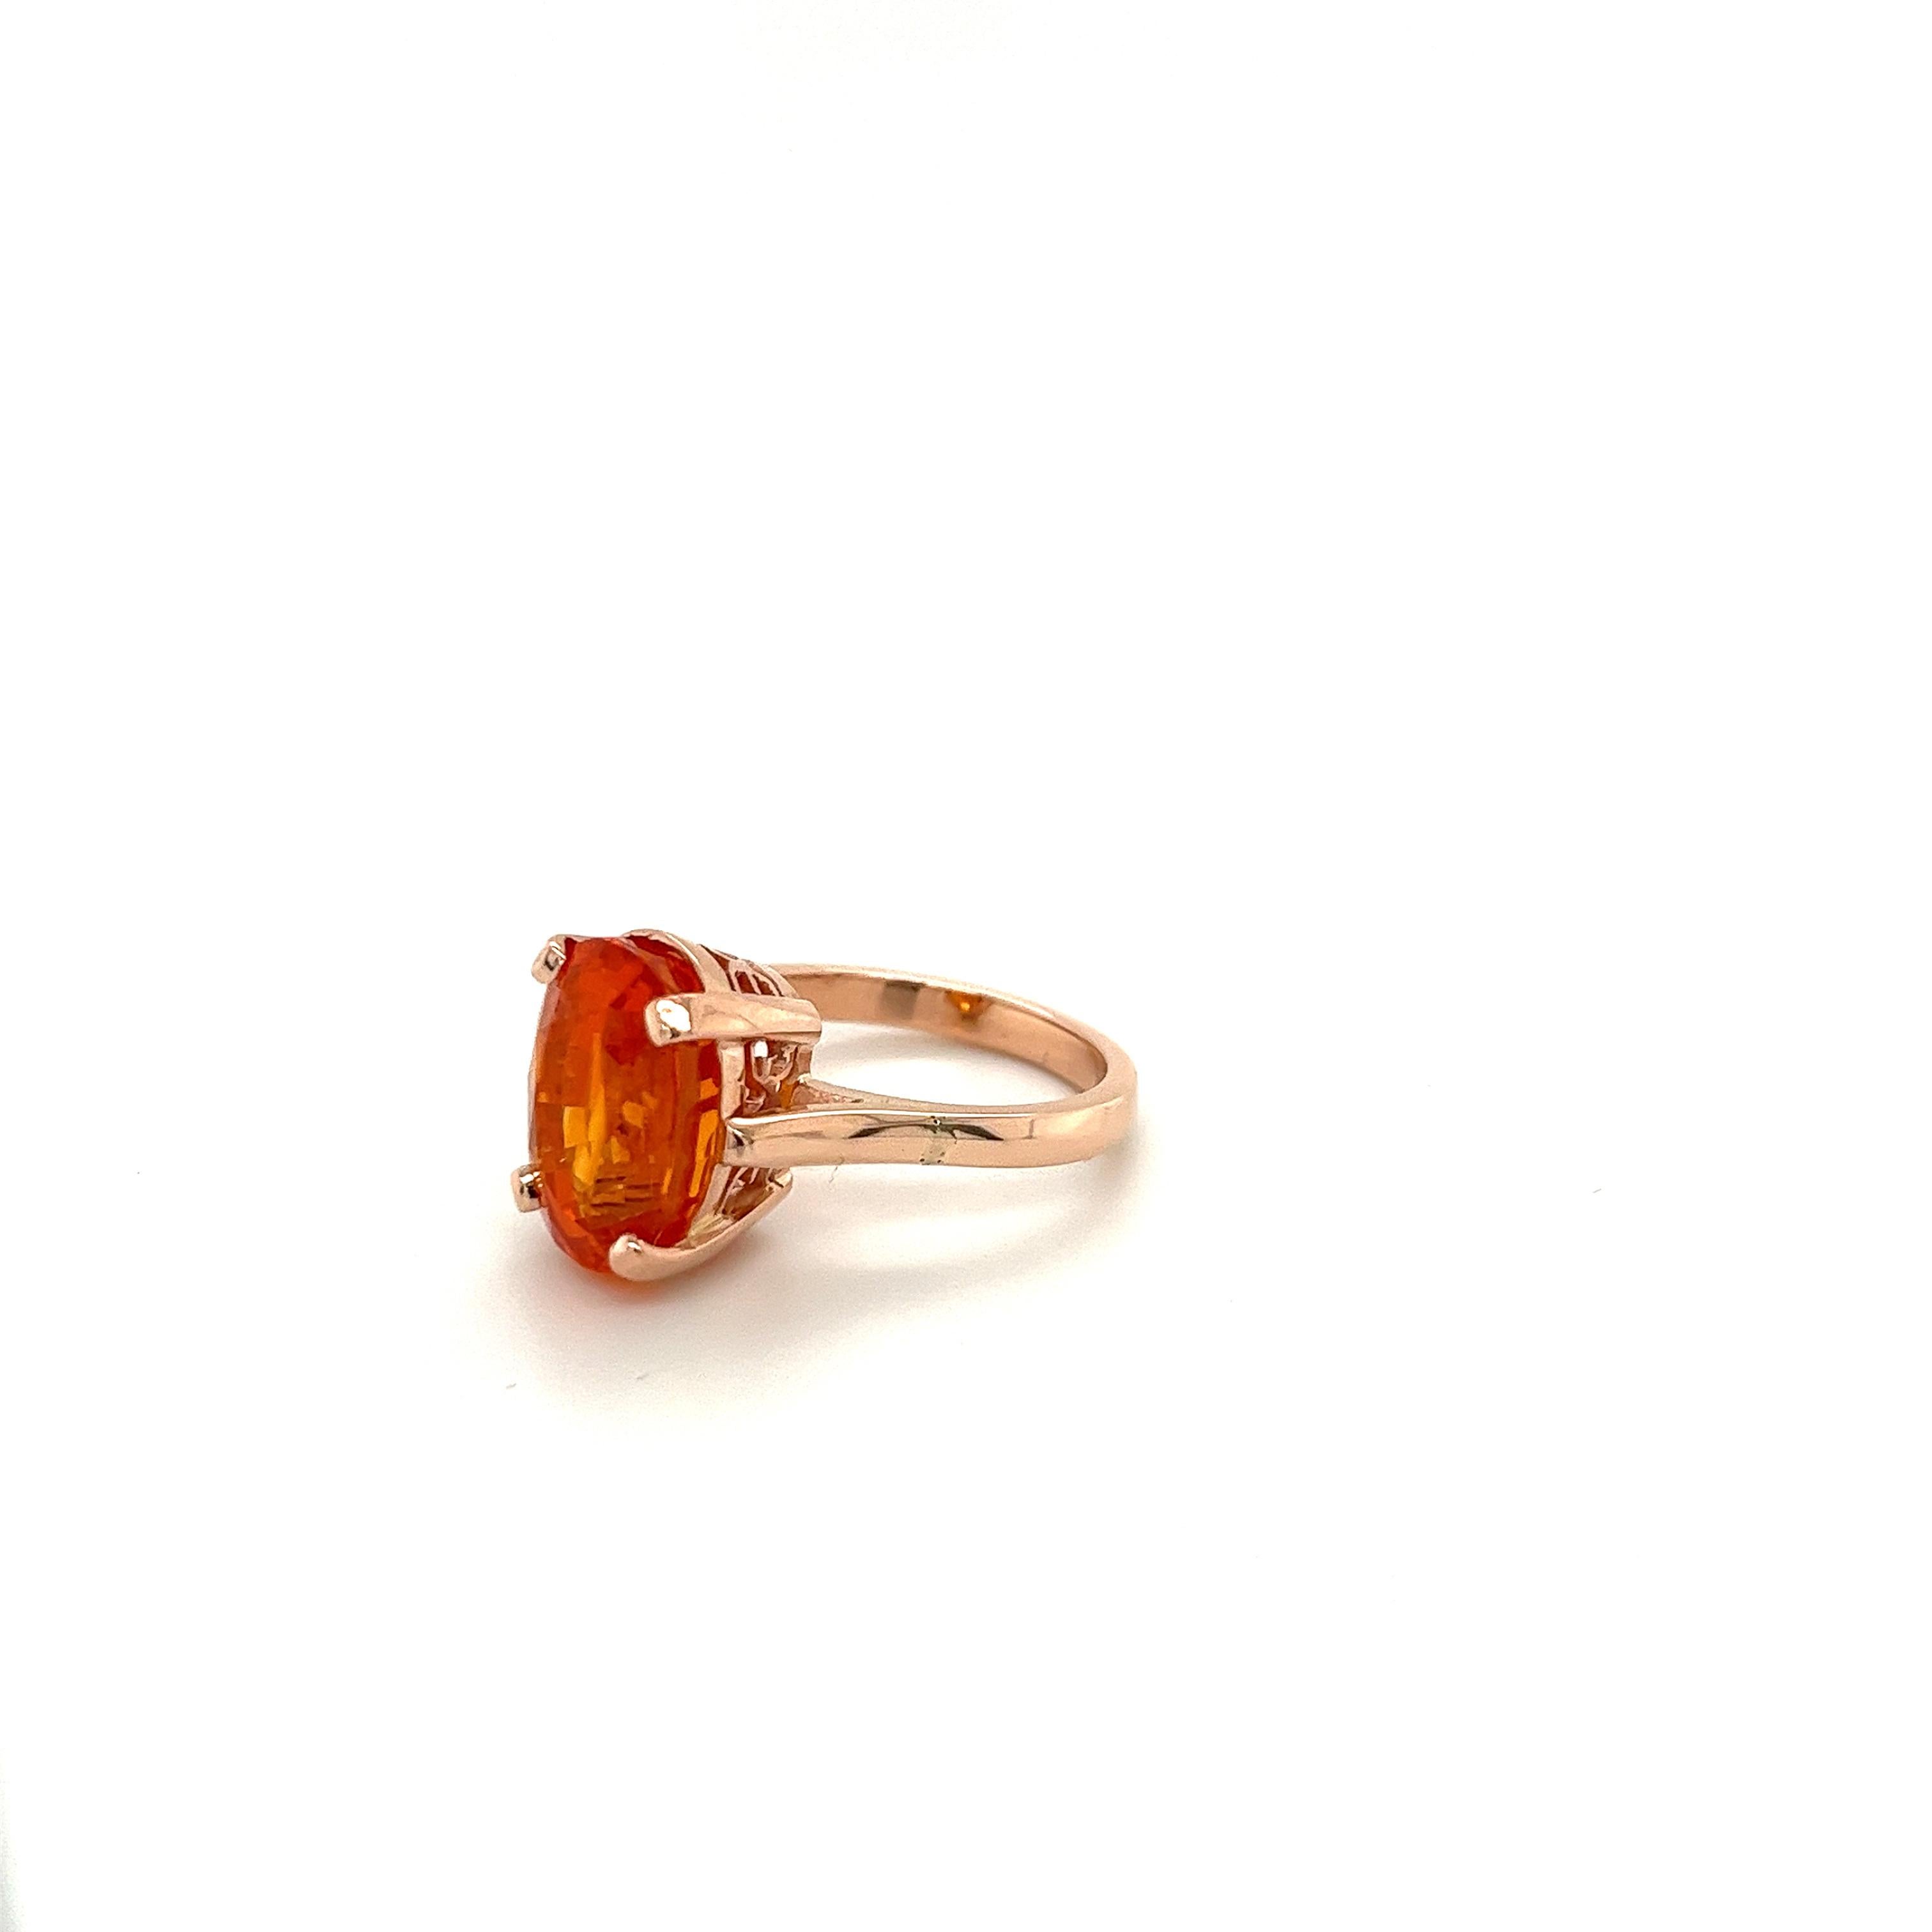 GIA certified 11 carat Orange Sapphire of Sri Lanka origin set in 14k solid rose gold cathedral solitaire ring with carved basket. 

For those searching for a fine quality Sapphire that's exploding with vibrance and color. Set in a solitaire 4-prong